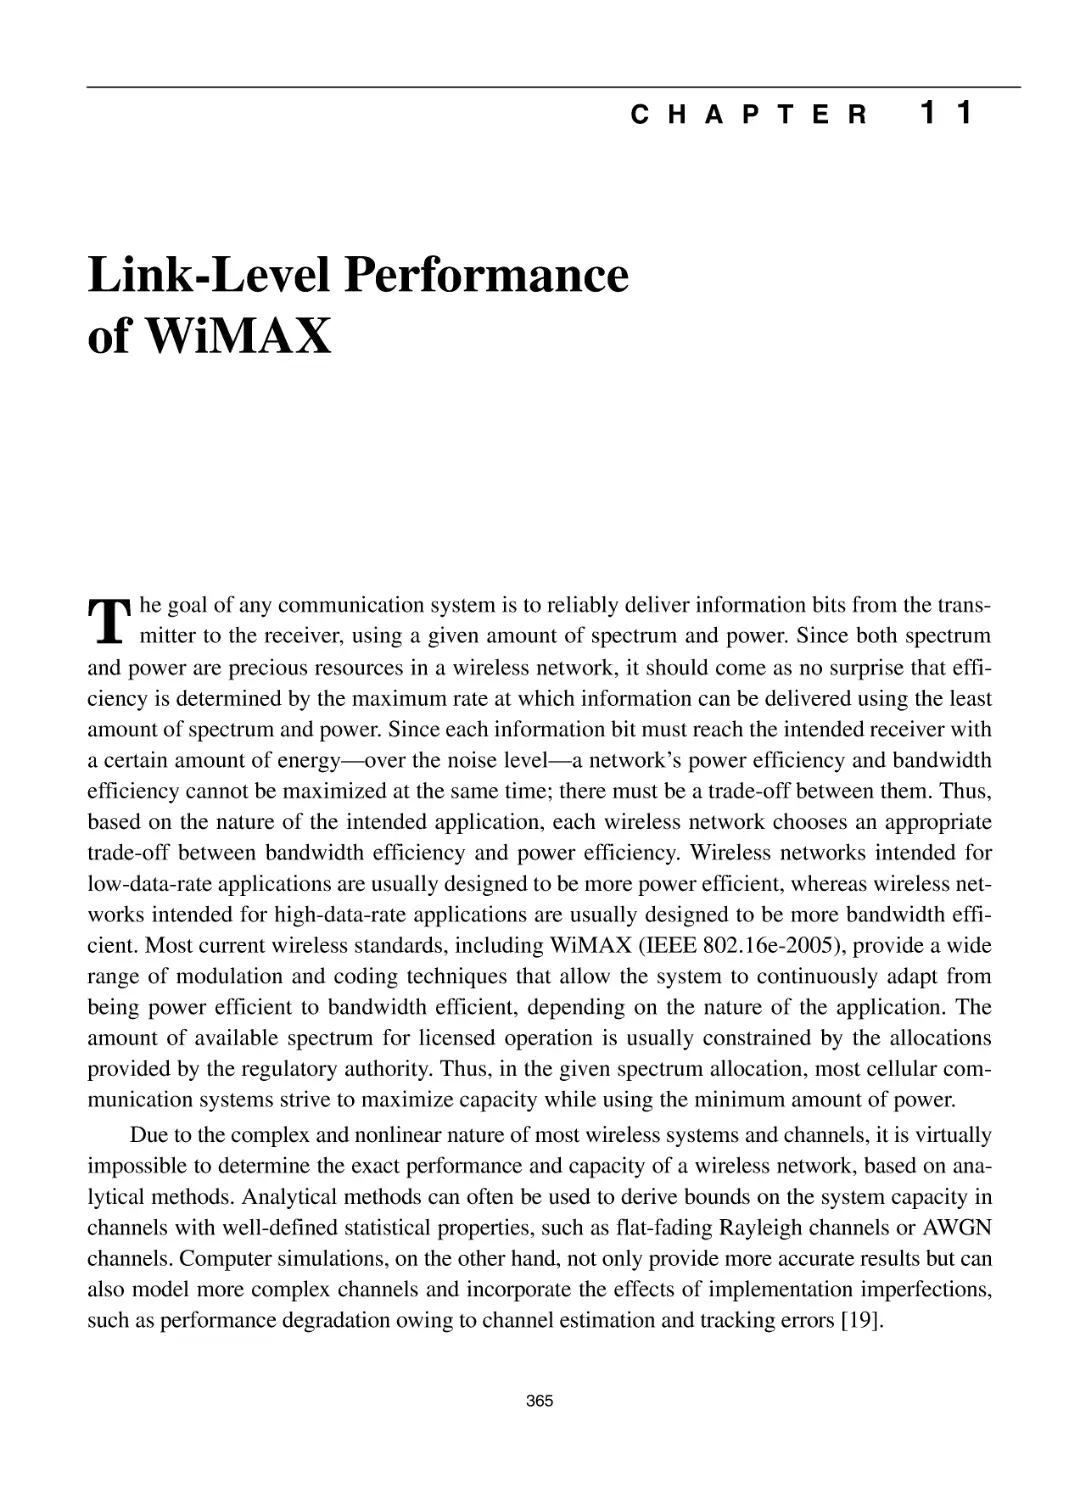 Chapter 11 Link-Level Performance of WiMAX